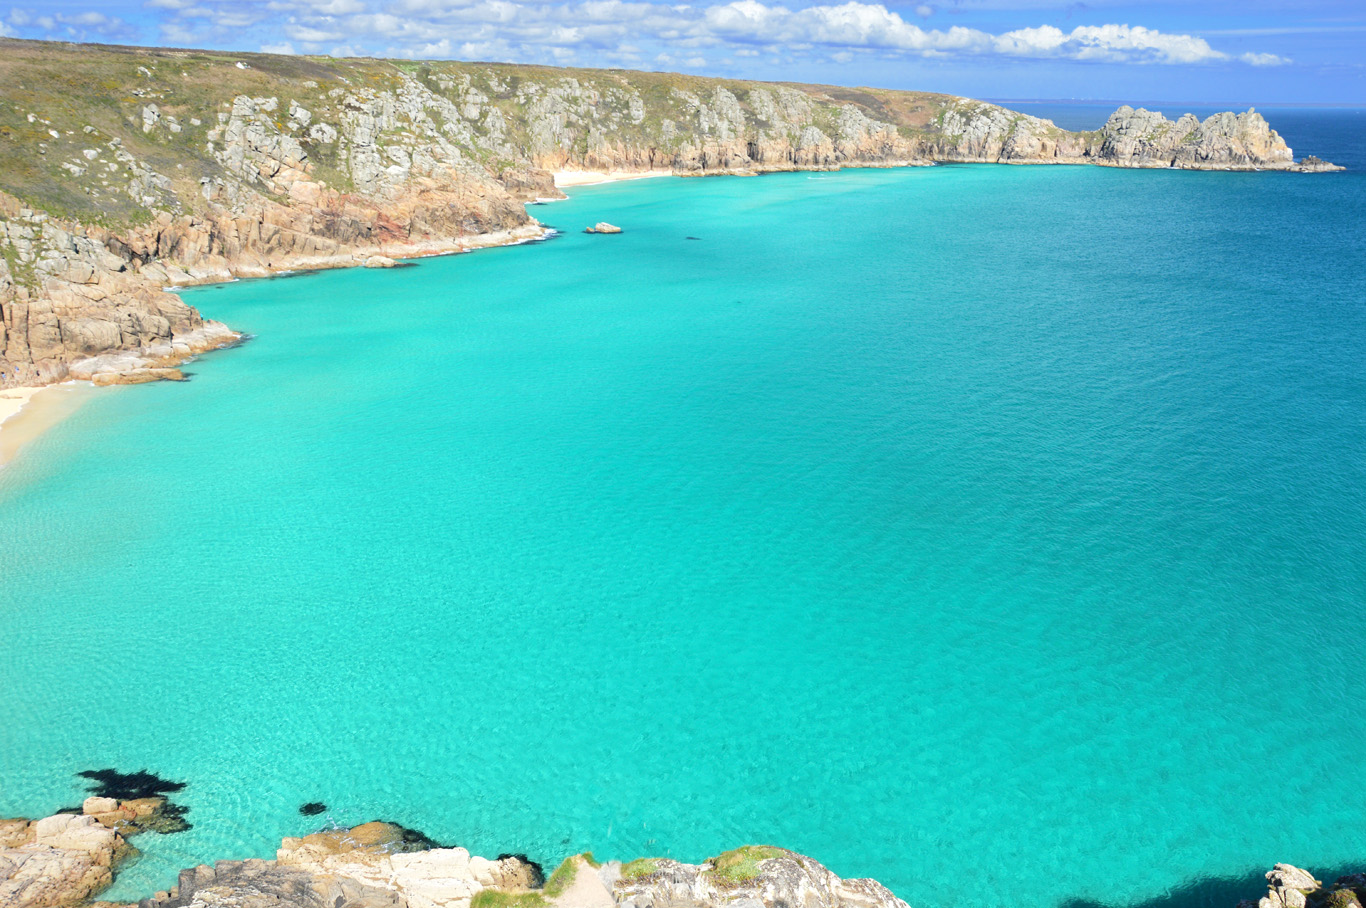   Cornwall - Best Beaches in the UK     more info   